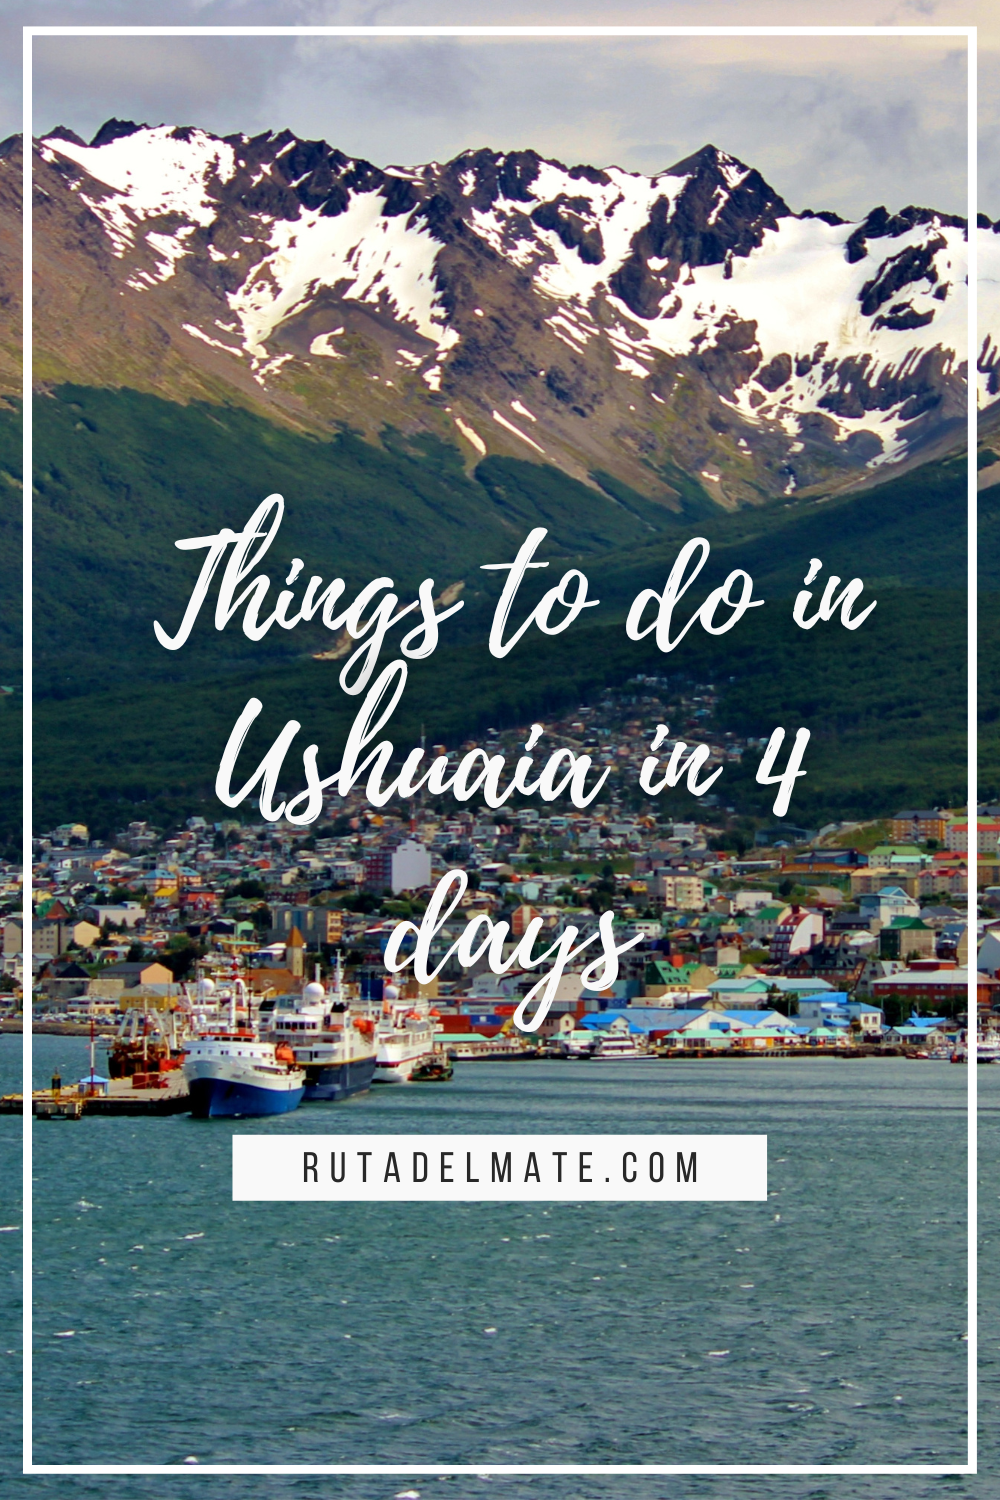 Things to do in Ushuaia in 4 days